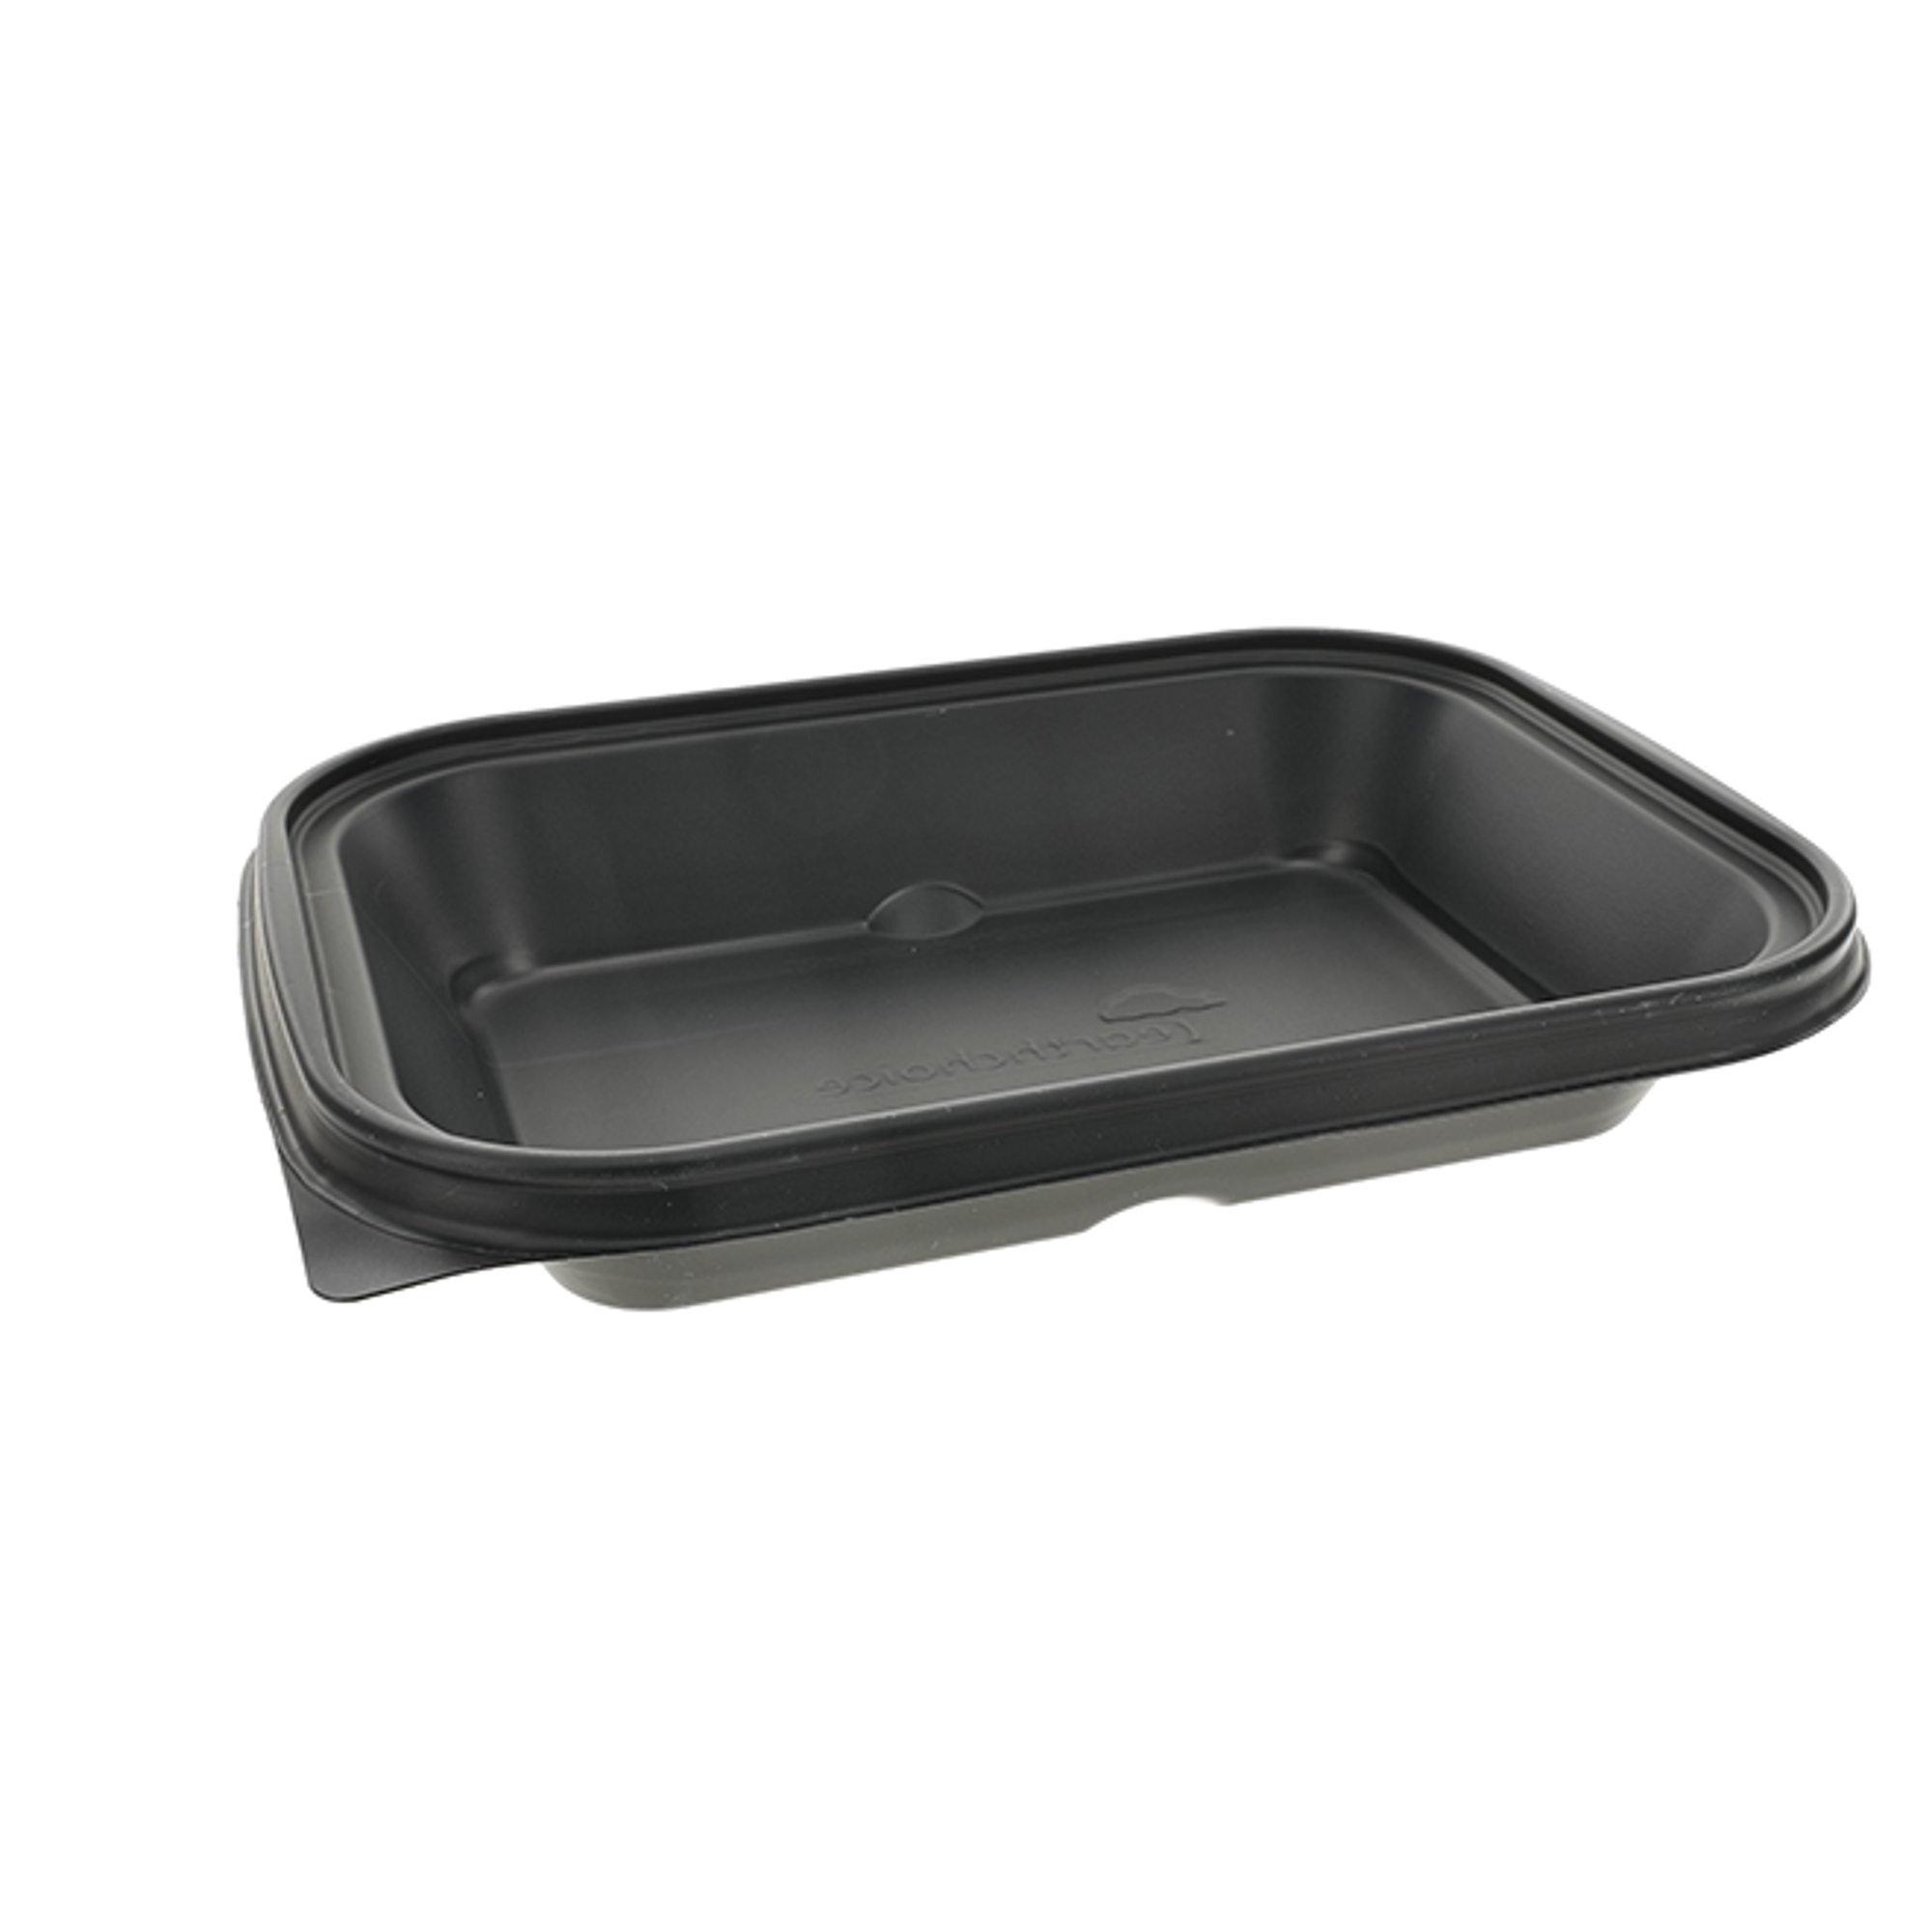 Cubeware Cubeware 48 oz. Rectangular Black Container With Clear Lid, PK100  CR-1147B